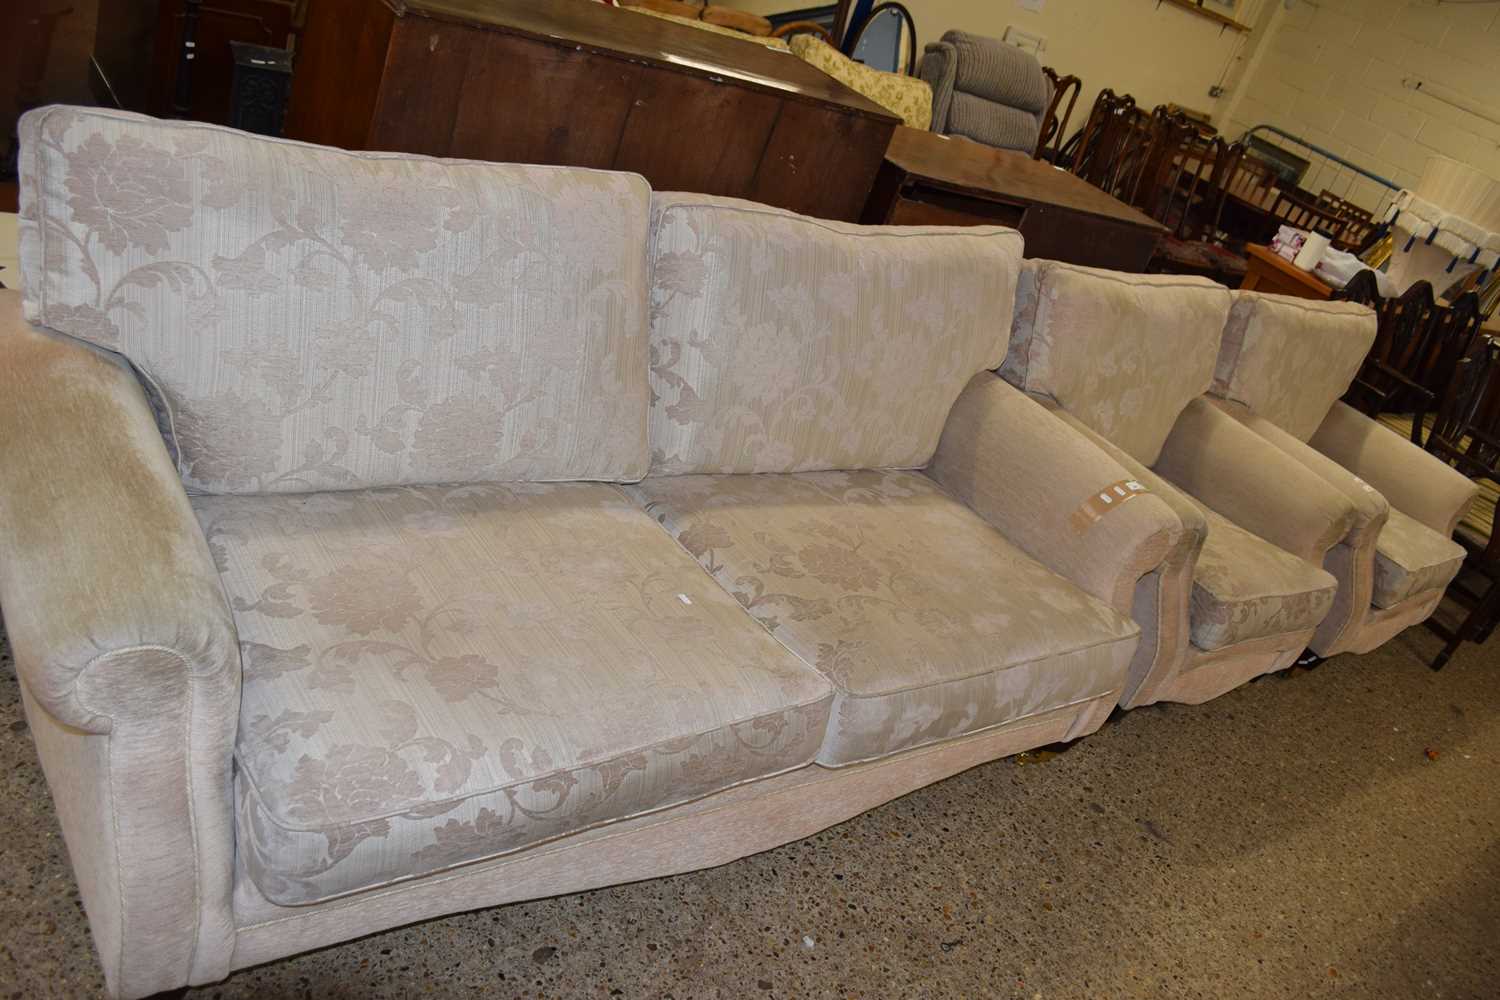 FLORAL UPHOLSTERED THREE PIECE SUITE